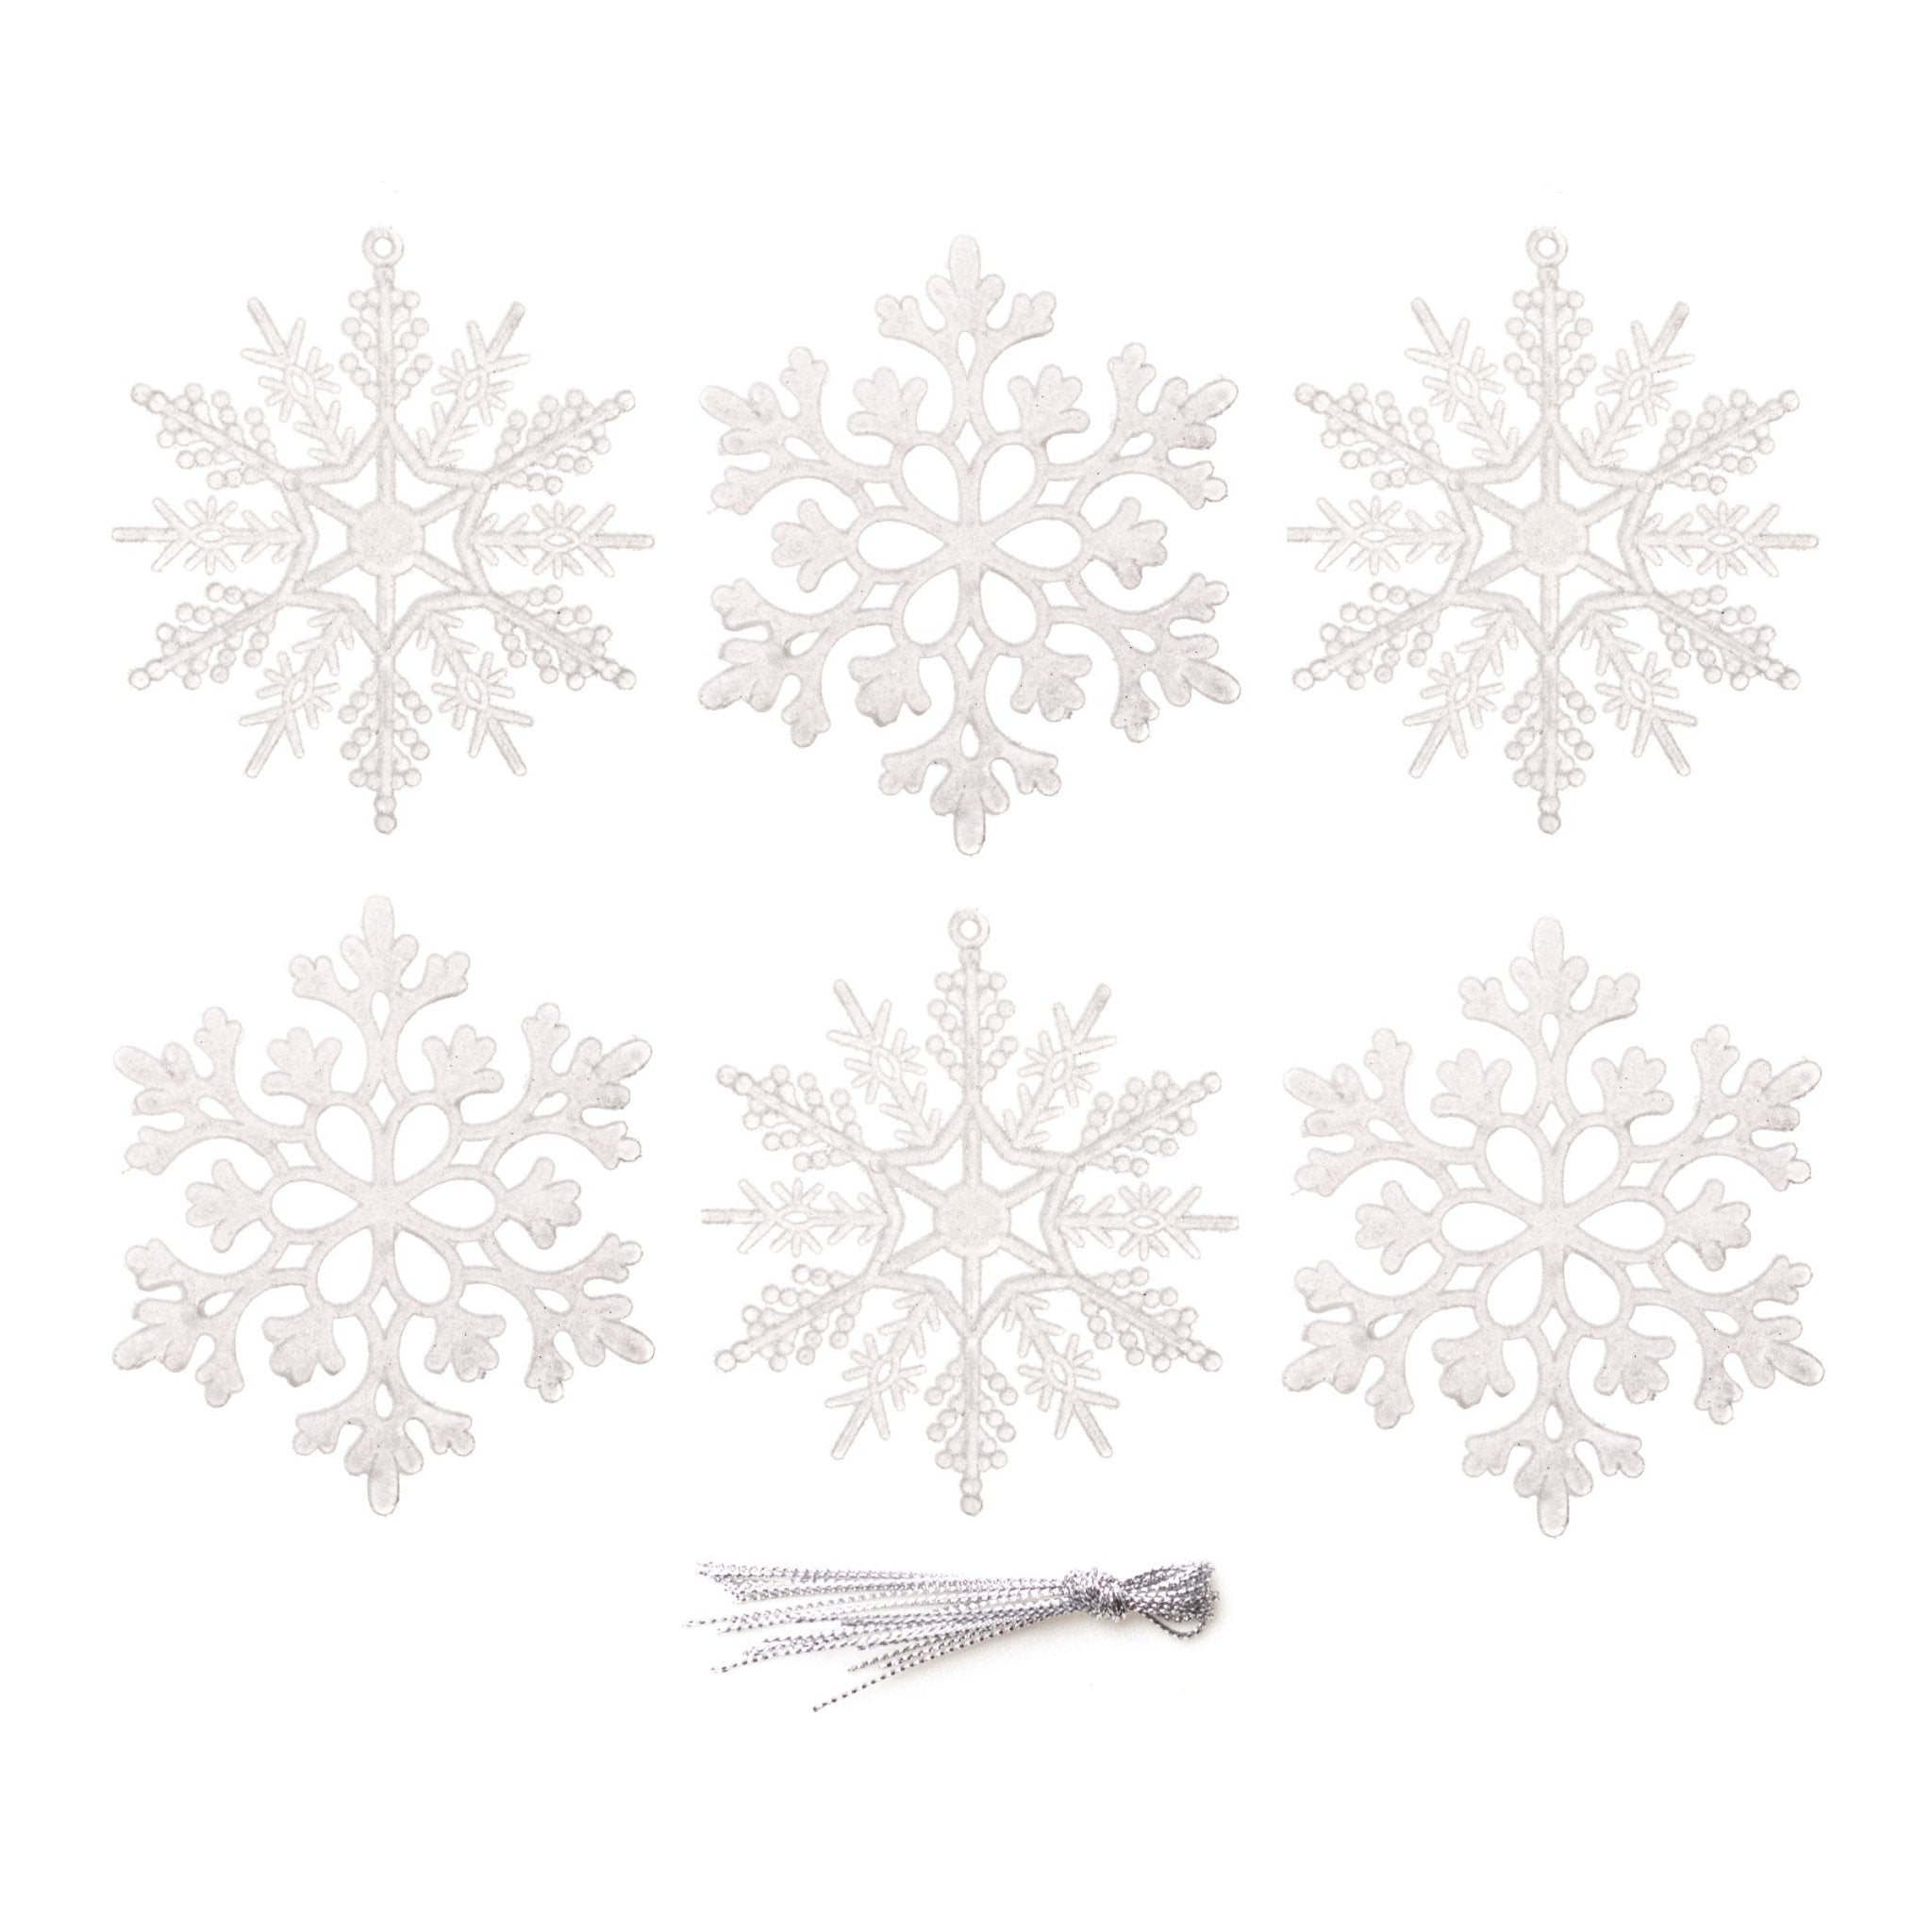 6pcs 10cm White Glittered Snowflakes Ornaments with Hanging Strings 01406 - MODA FLORA Santa's Workshop